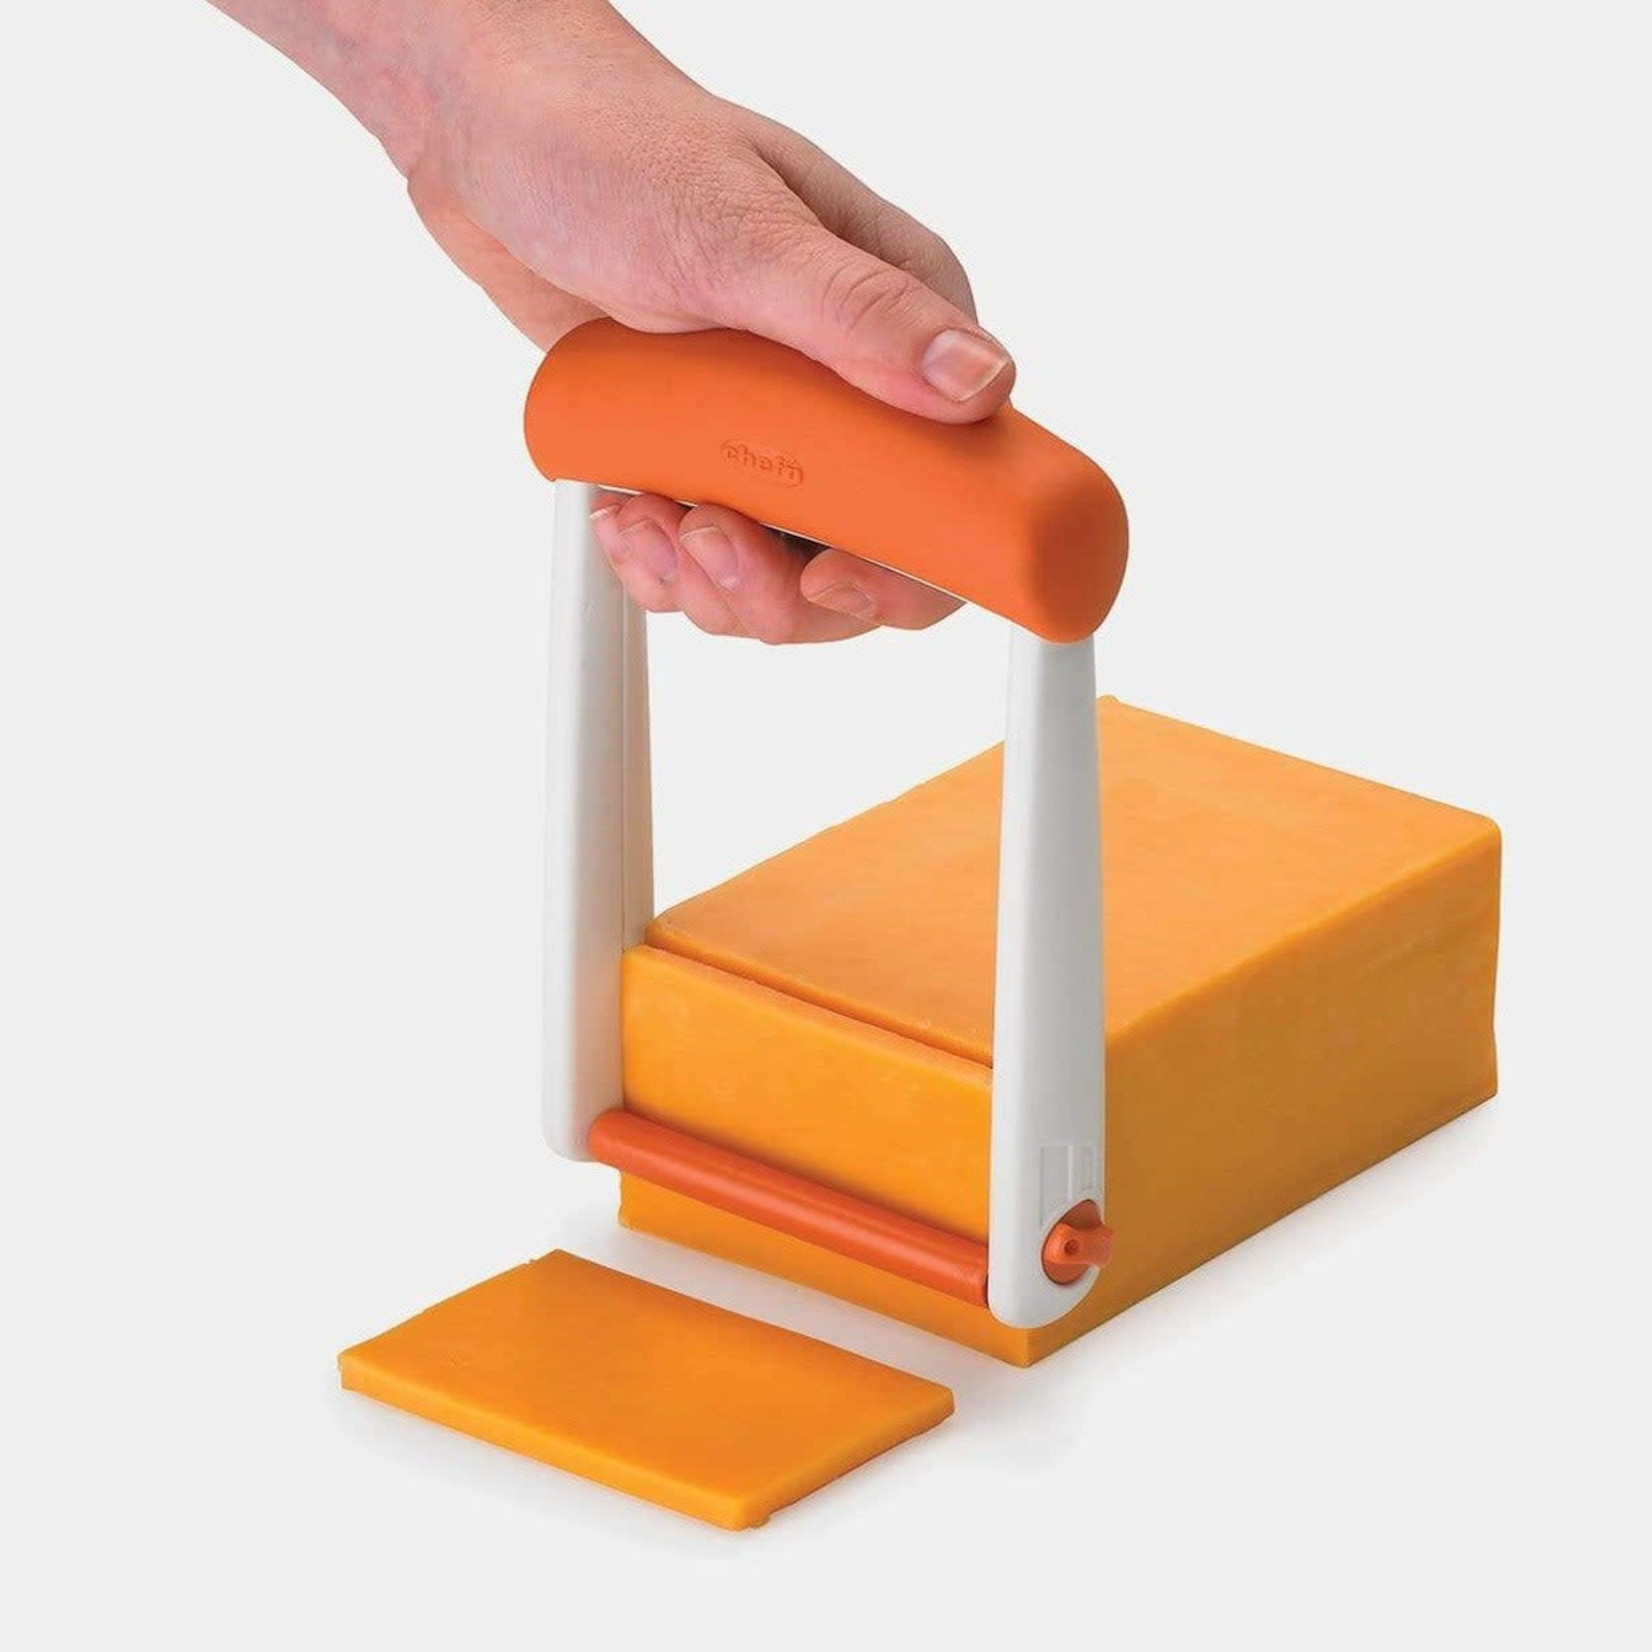 CHEF'N CHEF'N One Handed Cheese Slicer